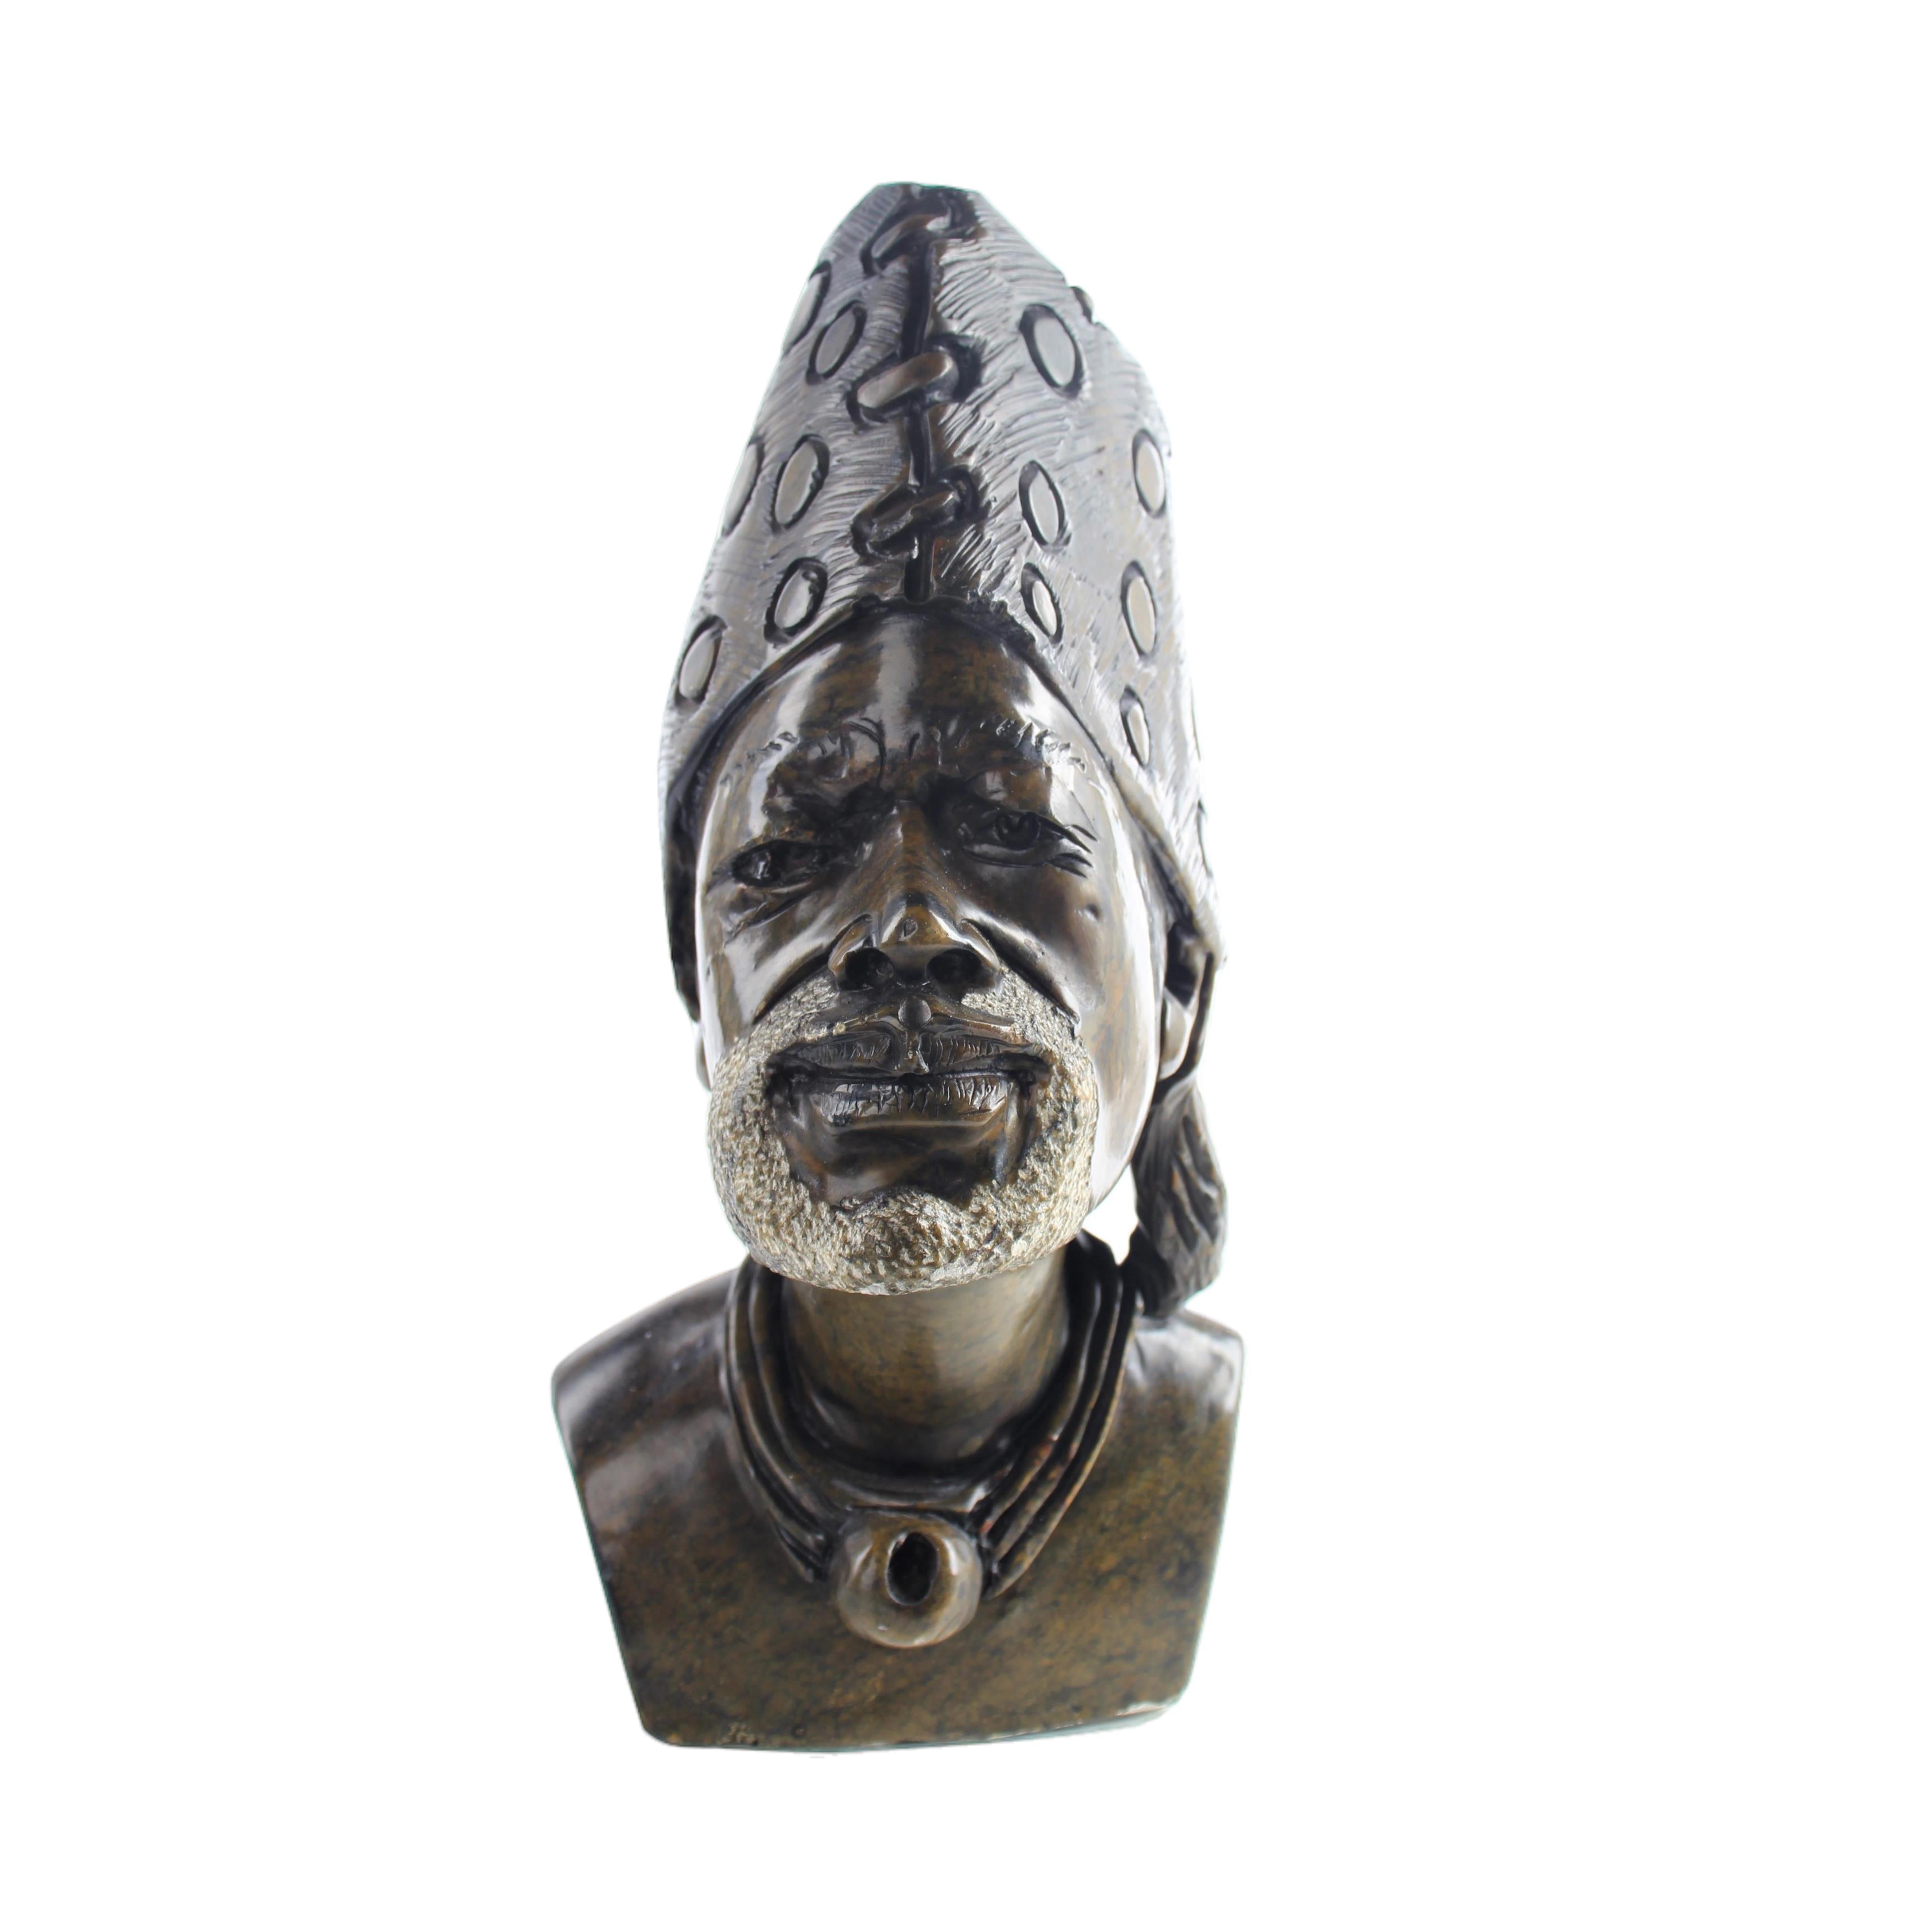 Shona Tribe Serpentine Stone Busts ~13.4" Tall - Busts